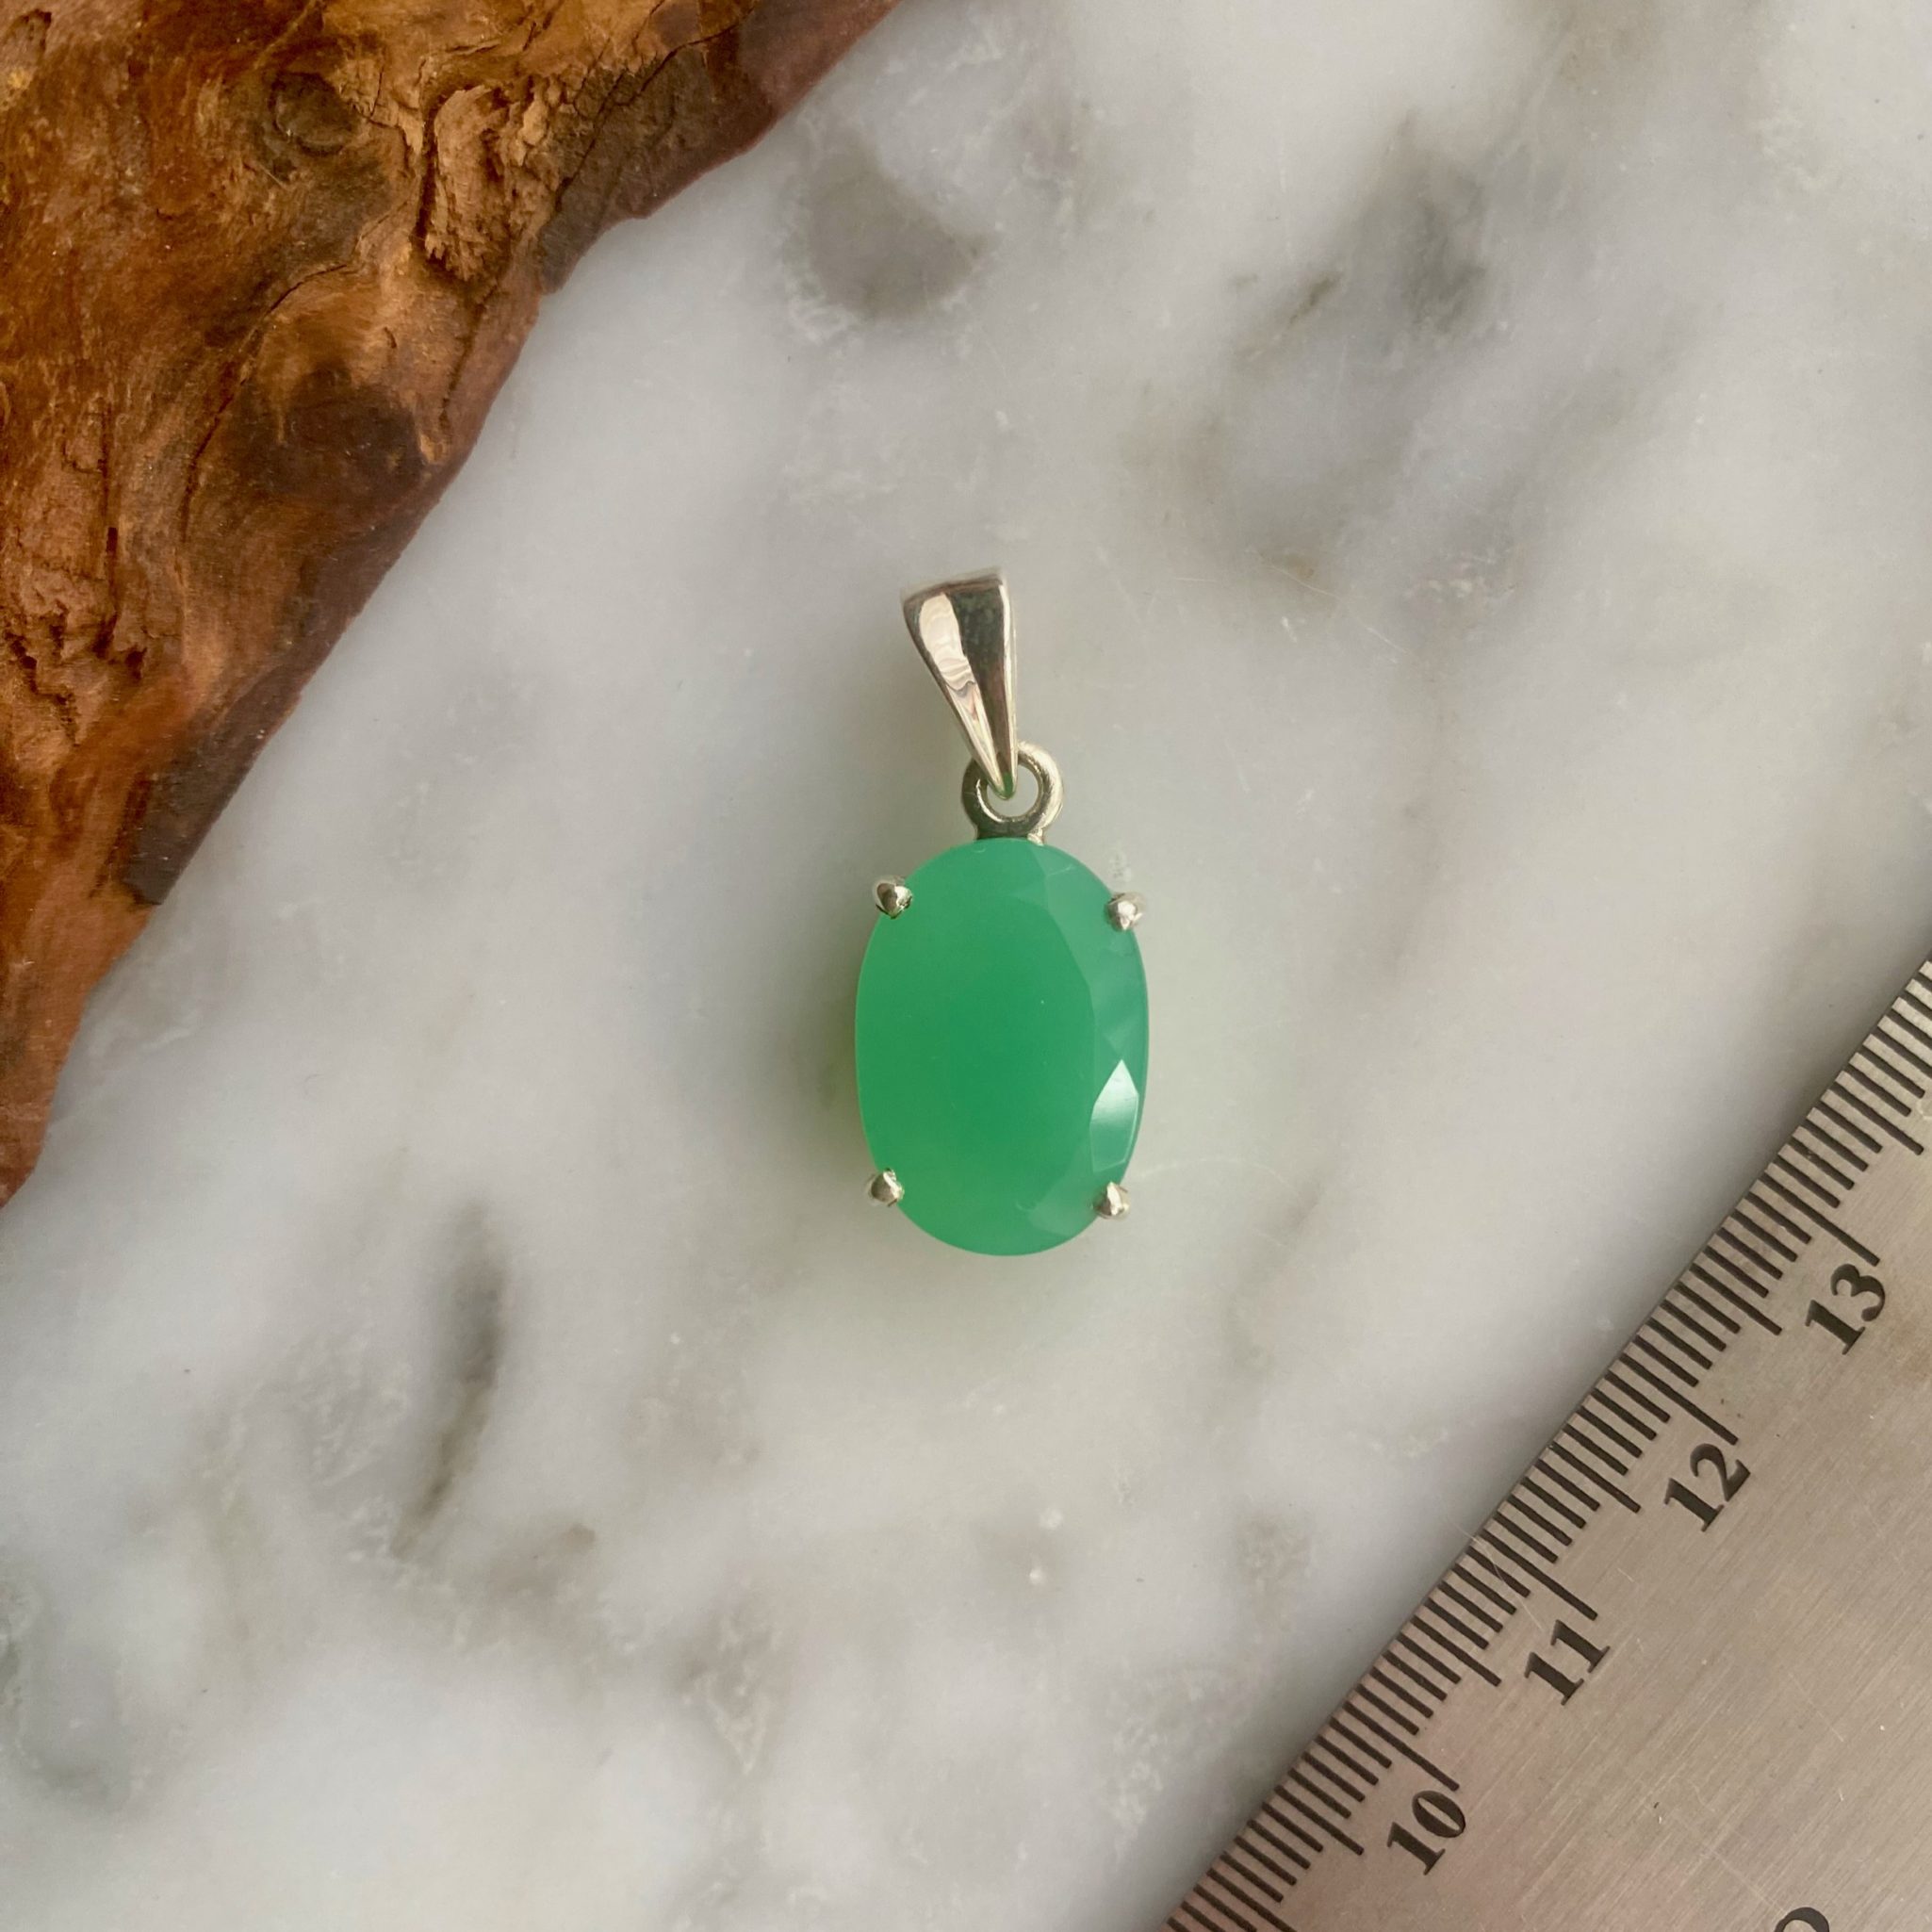 Facetted Chrysoprase Sterling Silver Pendant - Pendentif de Chrysoprase Facettée Argent Sterling